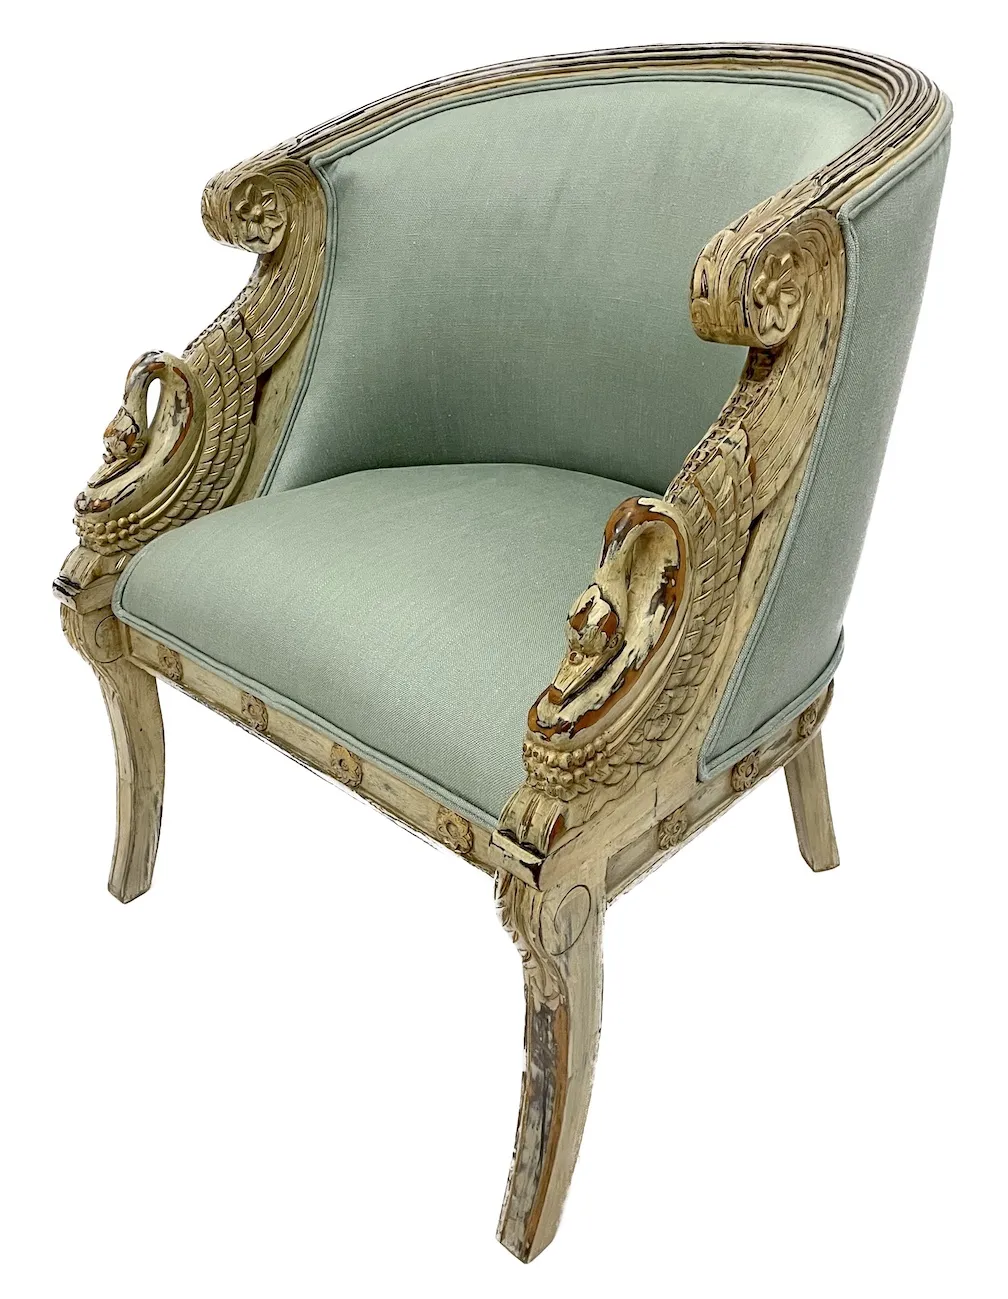 Swan Carved Empire Style Chair